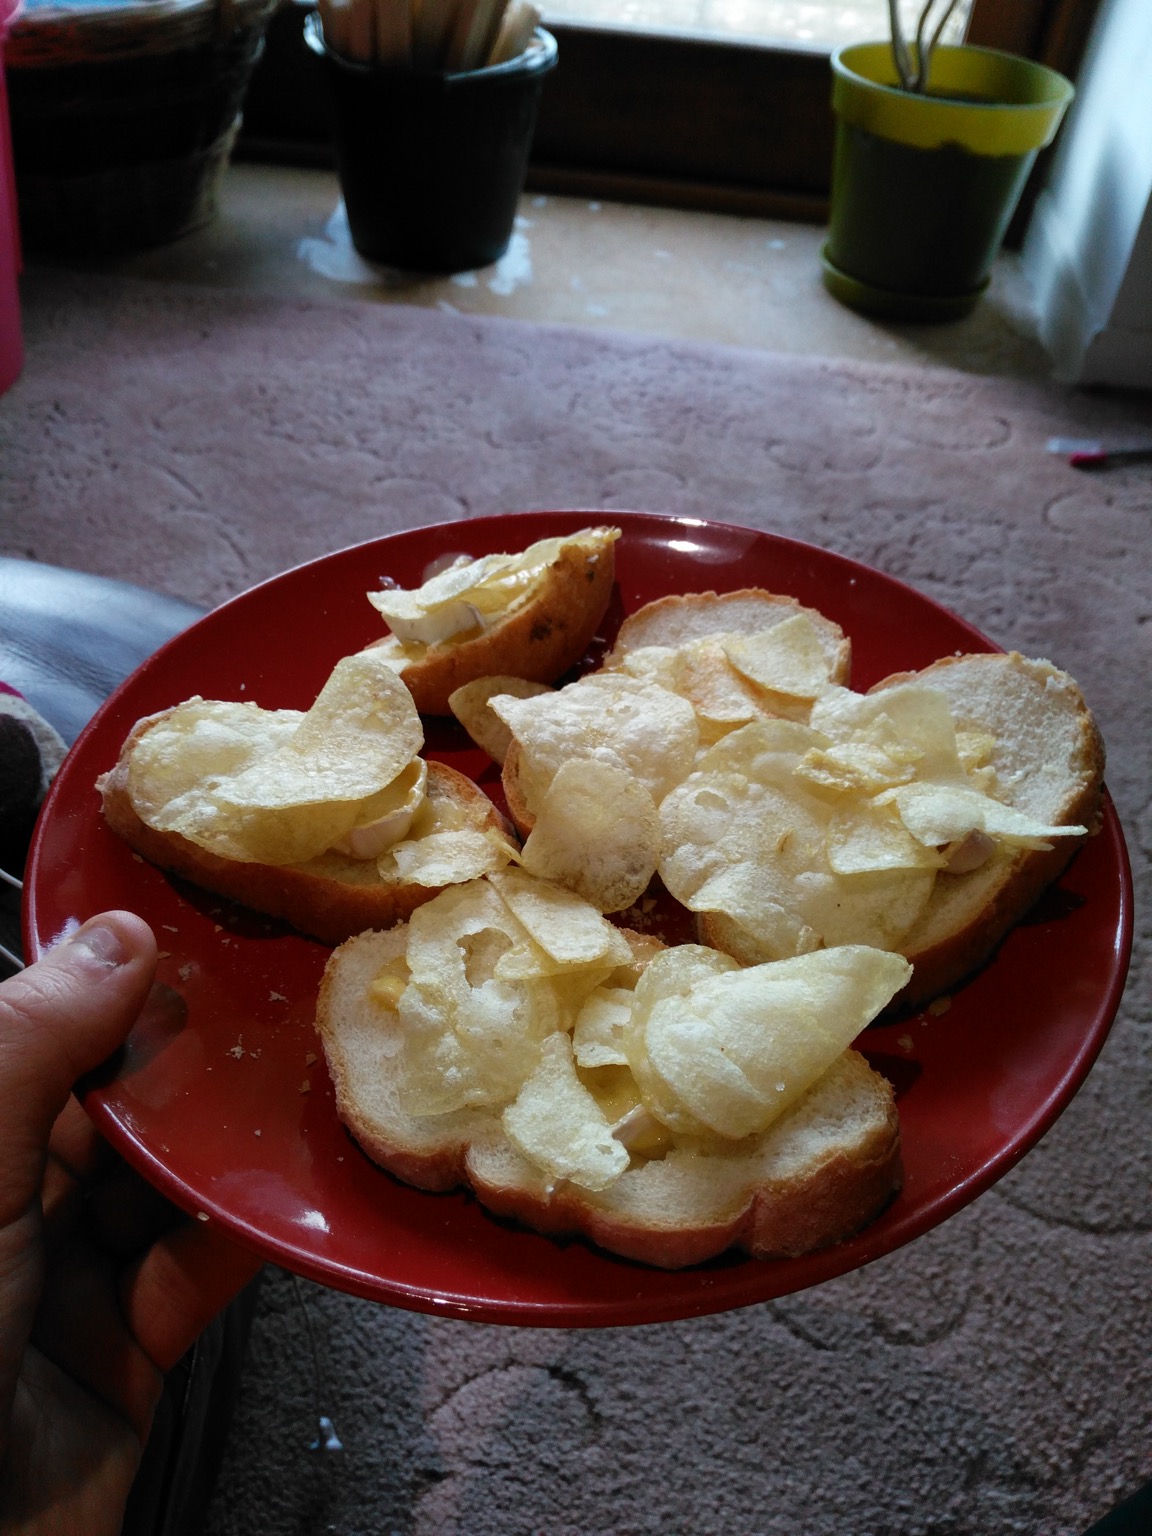 Crisps and cheese on slices of white bread